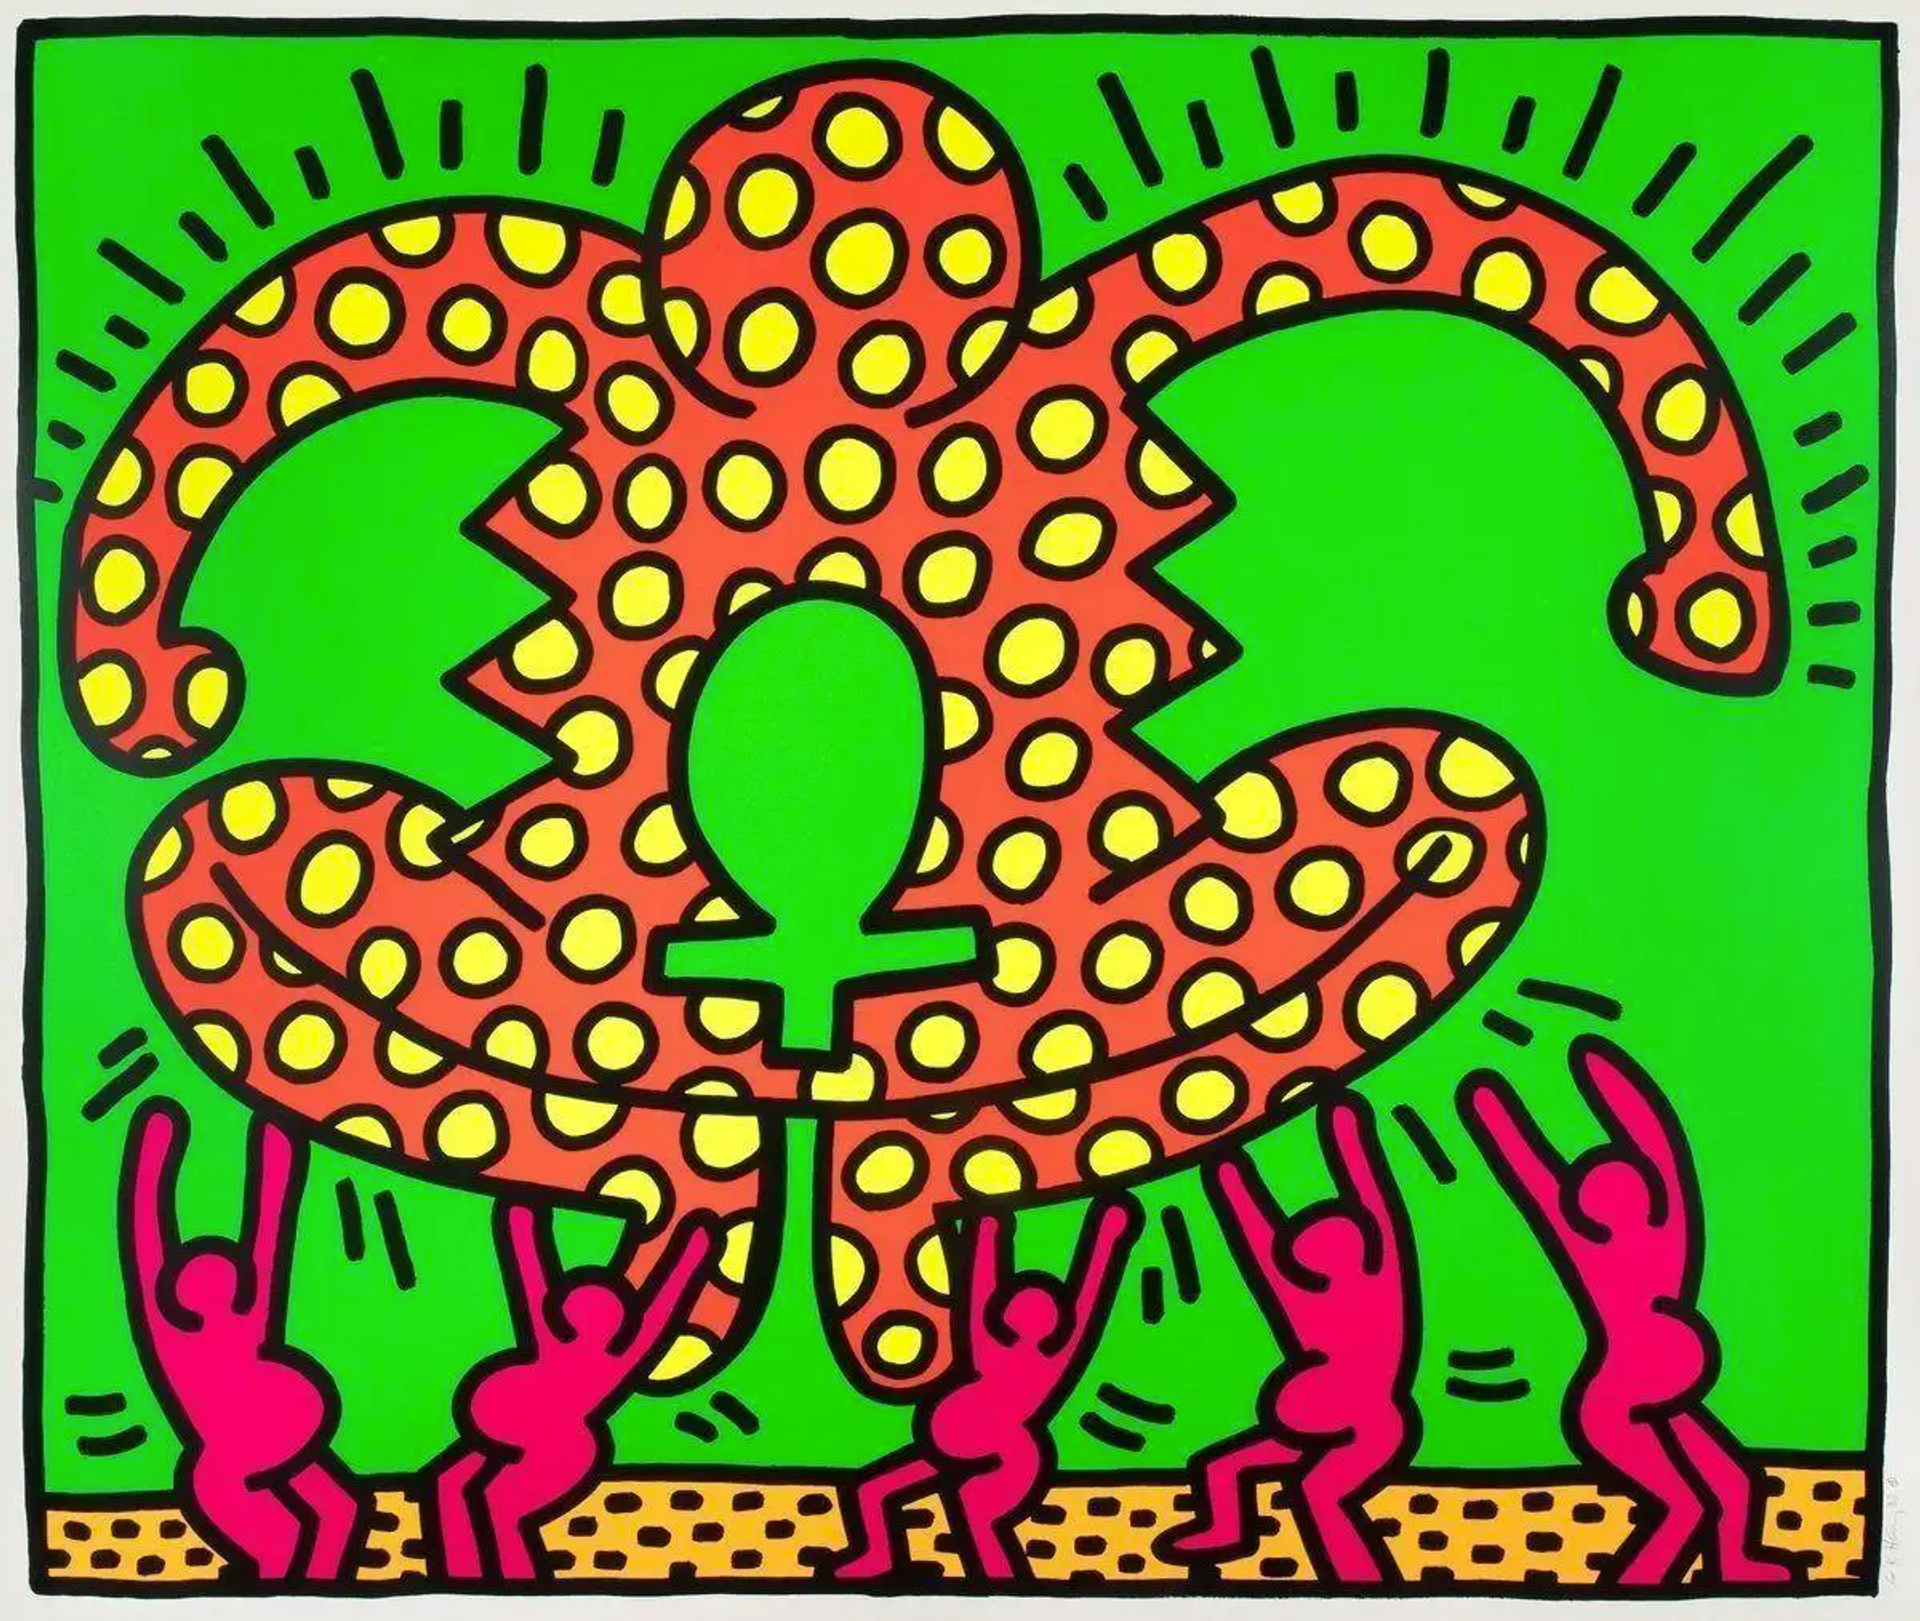 Keith Haring: Fertility and Injustice